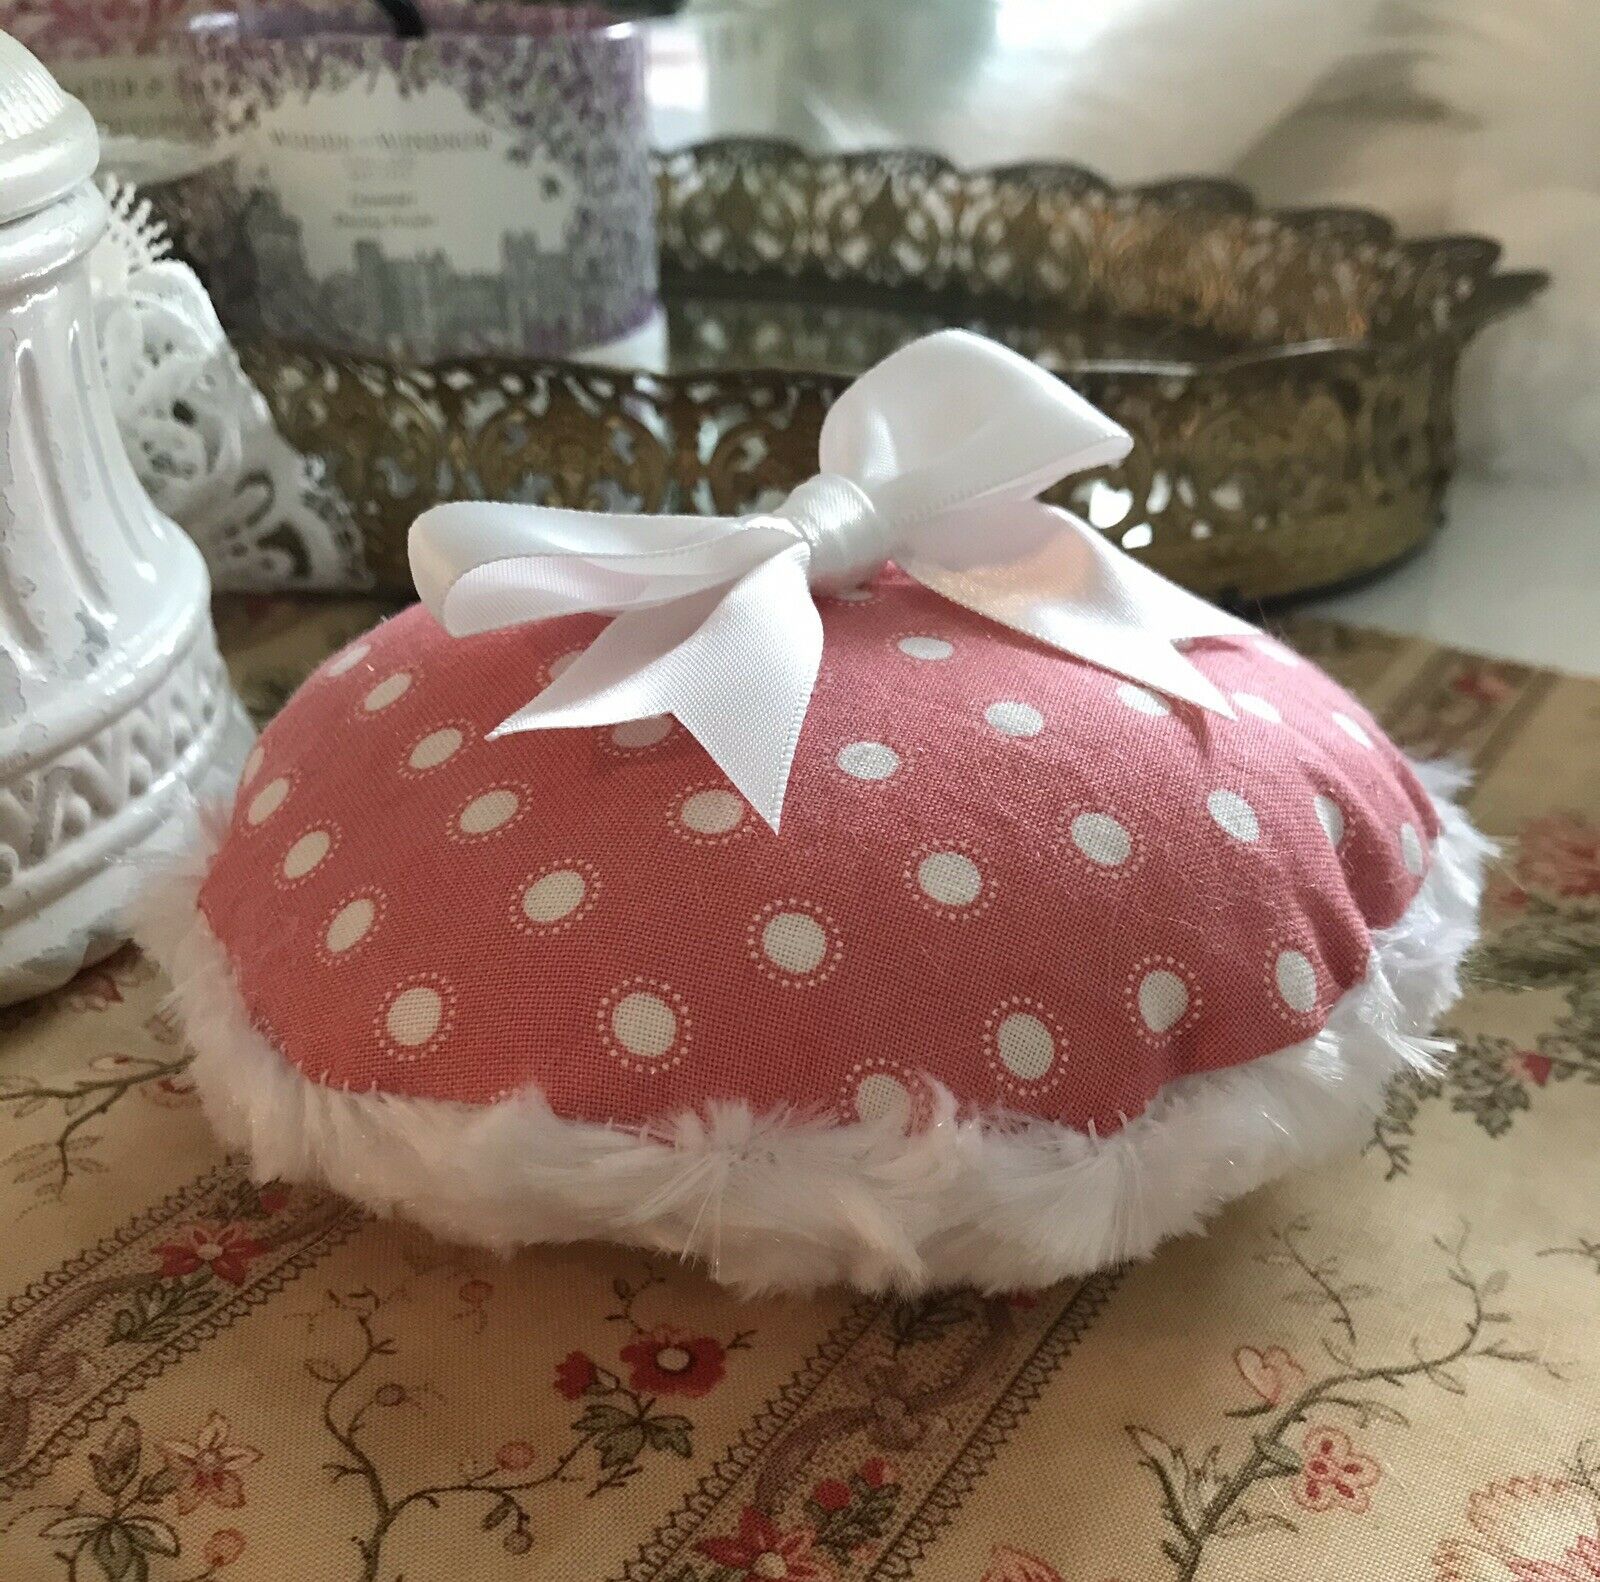 Luxe Puffs pink polka dot powder puff for dusting powder